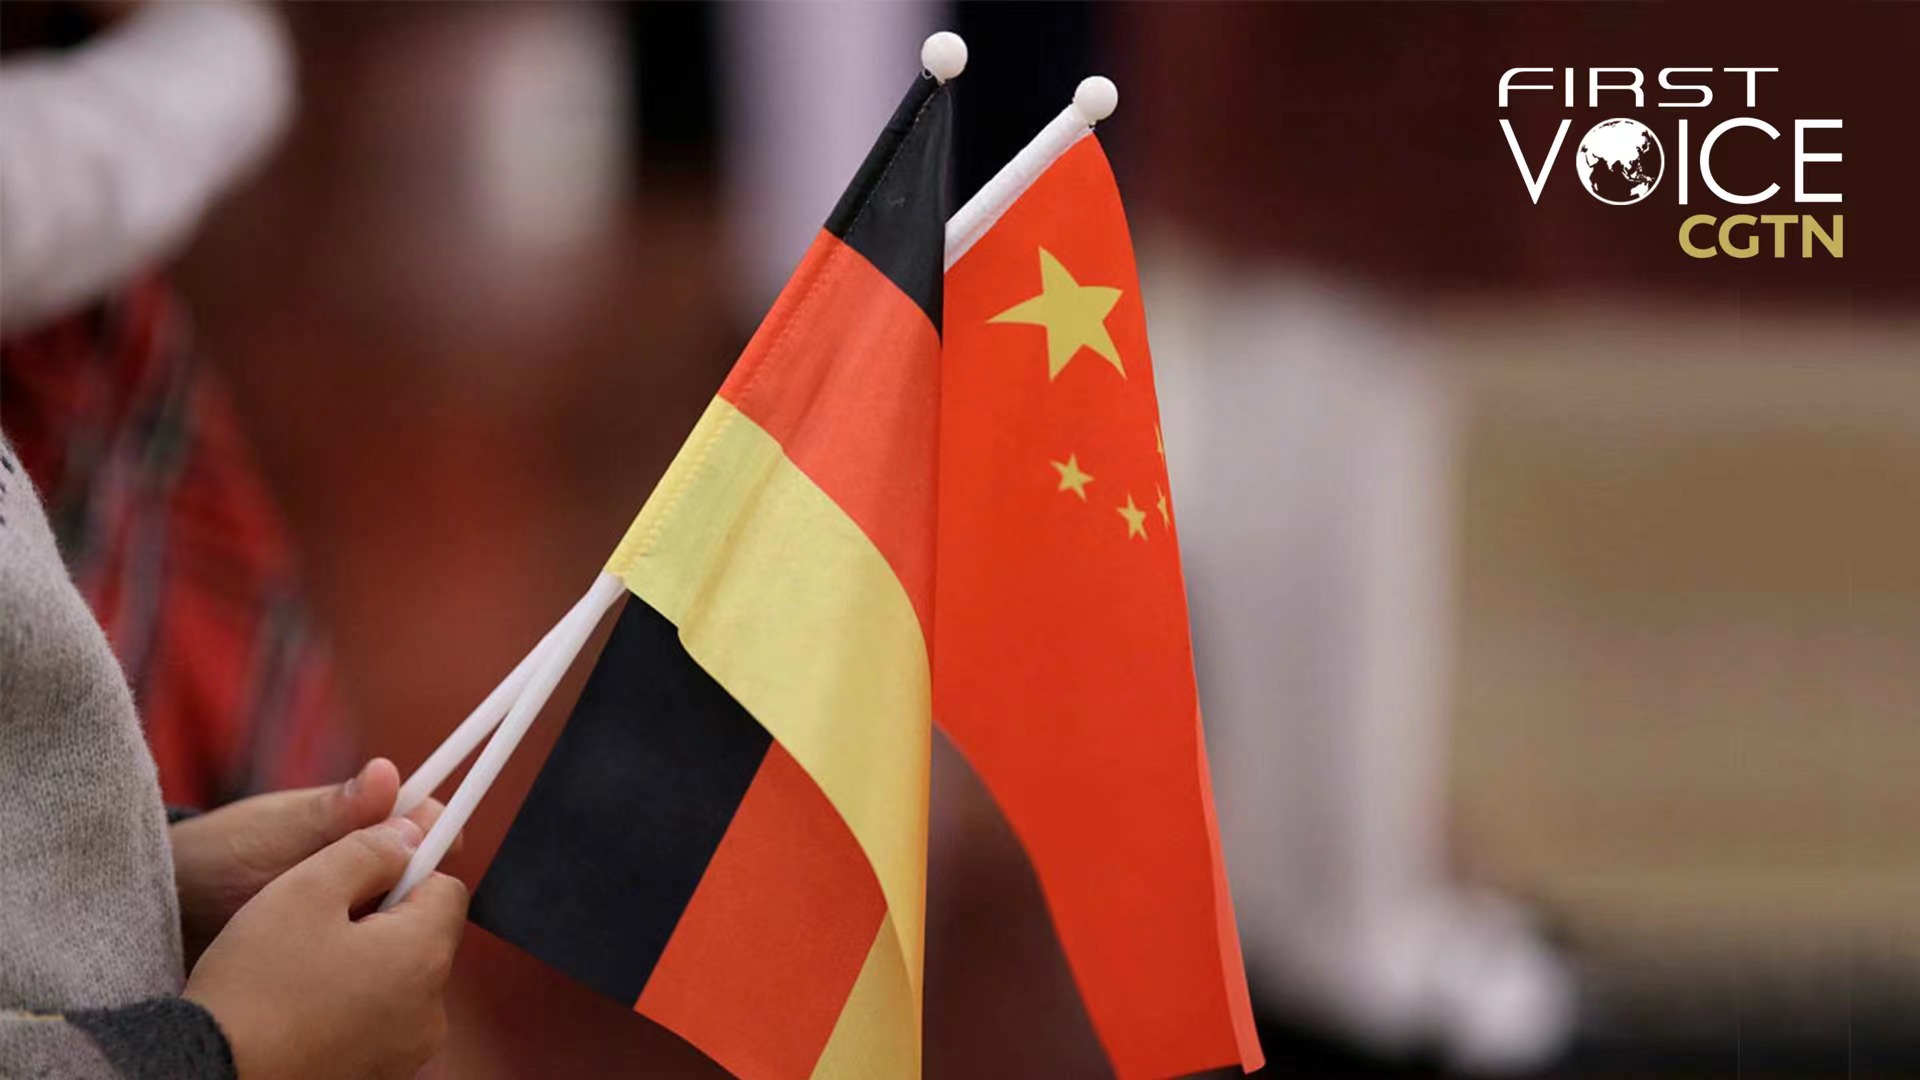 Germany, a rarity in the anti-China West